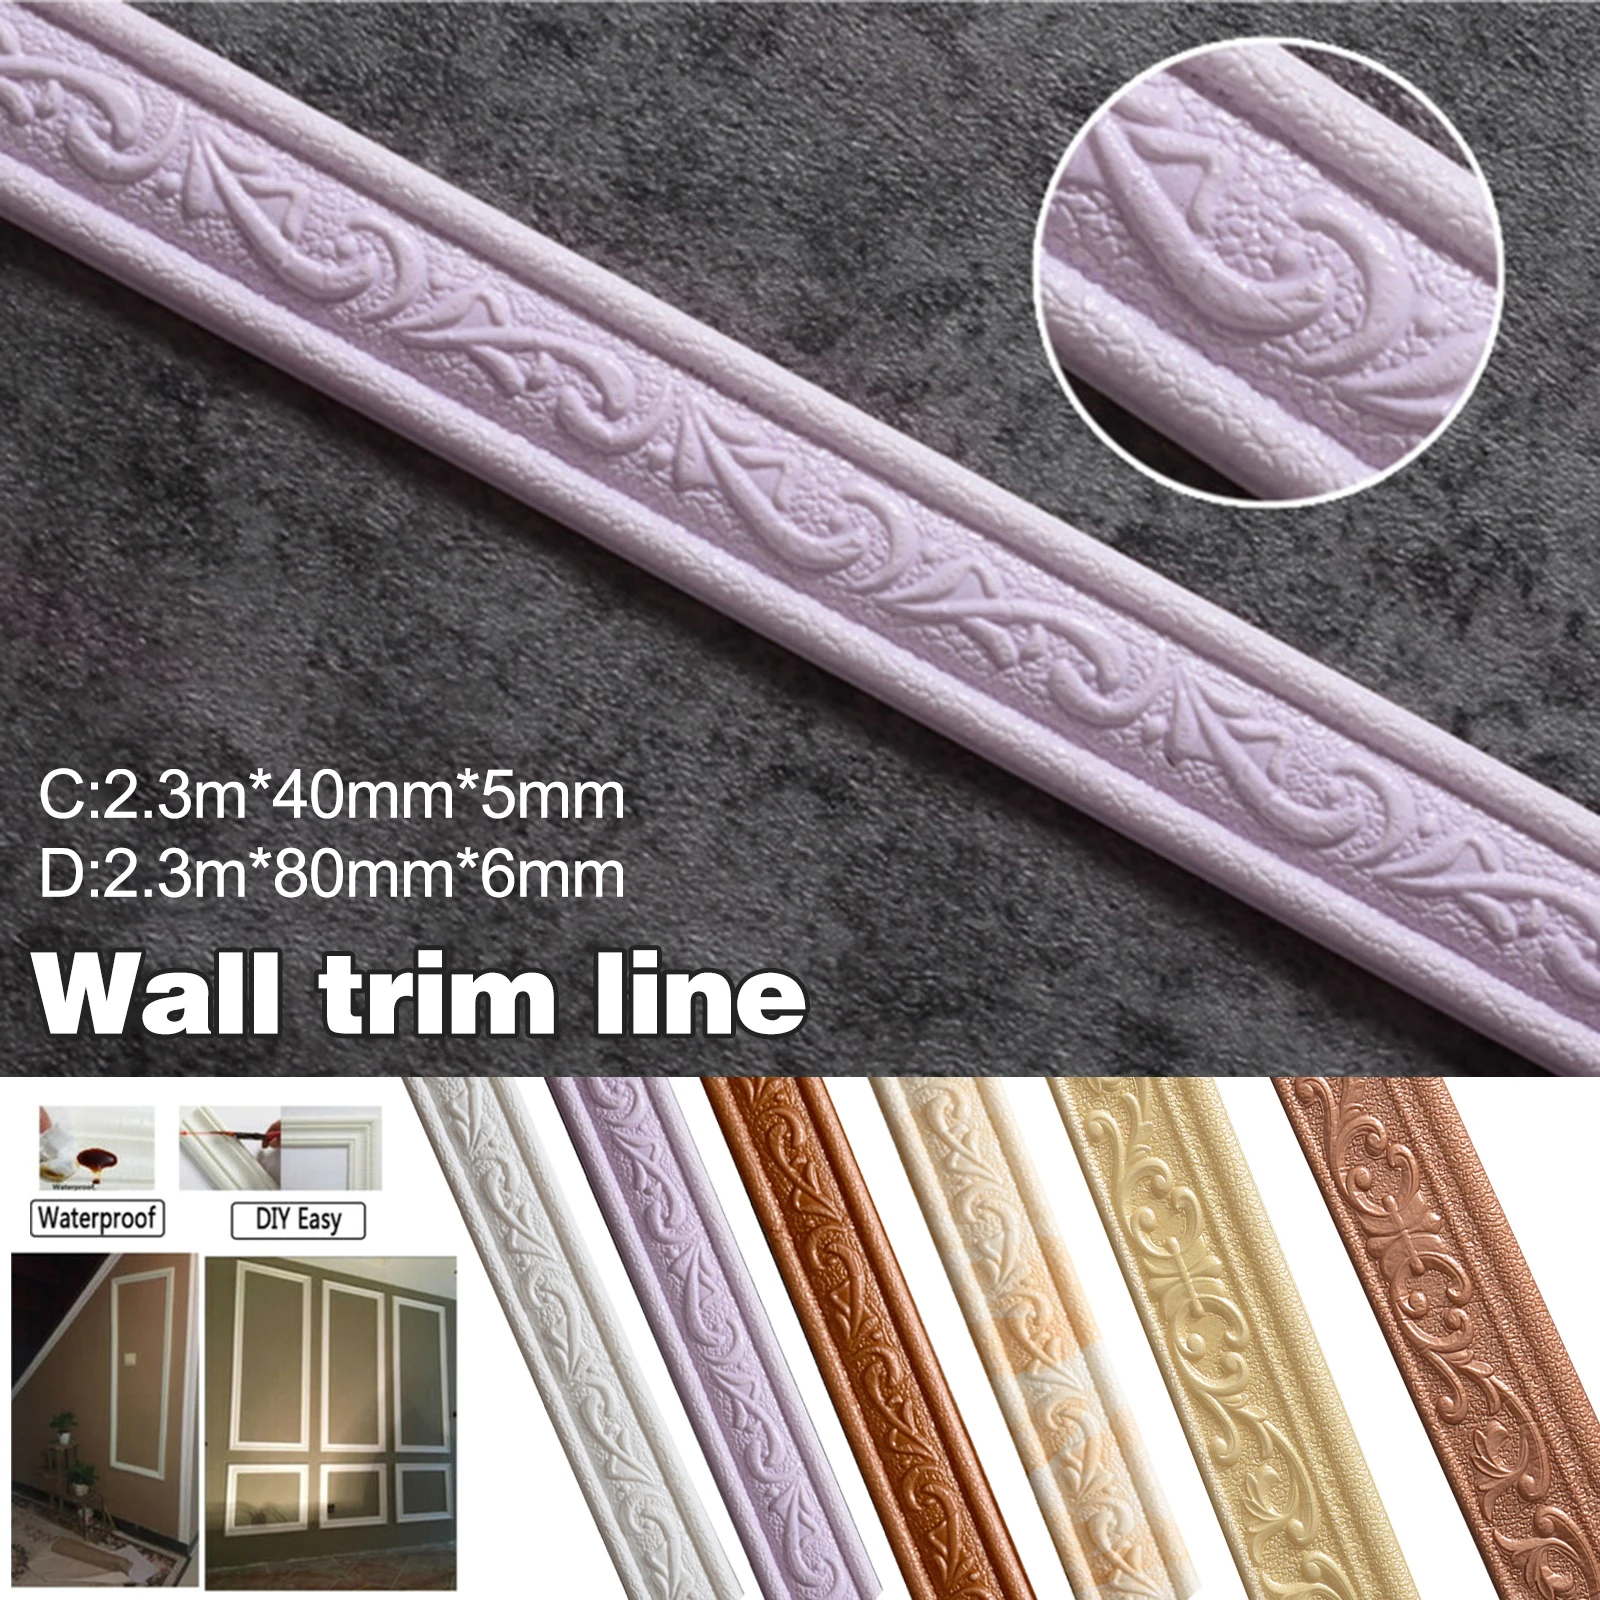 3D Pattern Sticker Wall Trim Line Skirting Border Decoration Self Adhesive Household For Living Room DIY Background Sticker